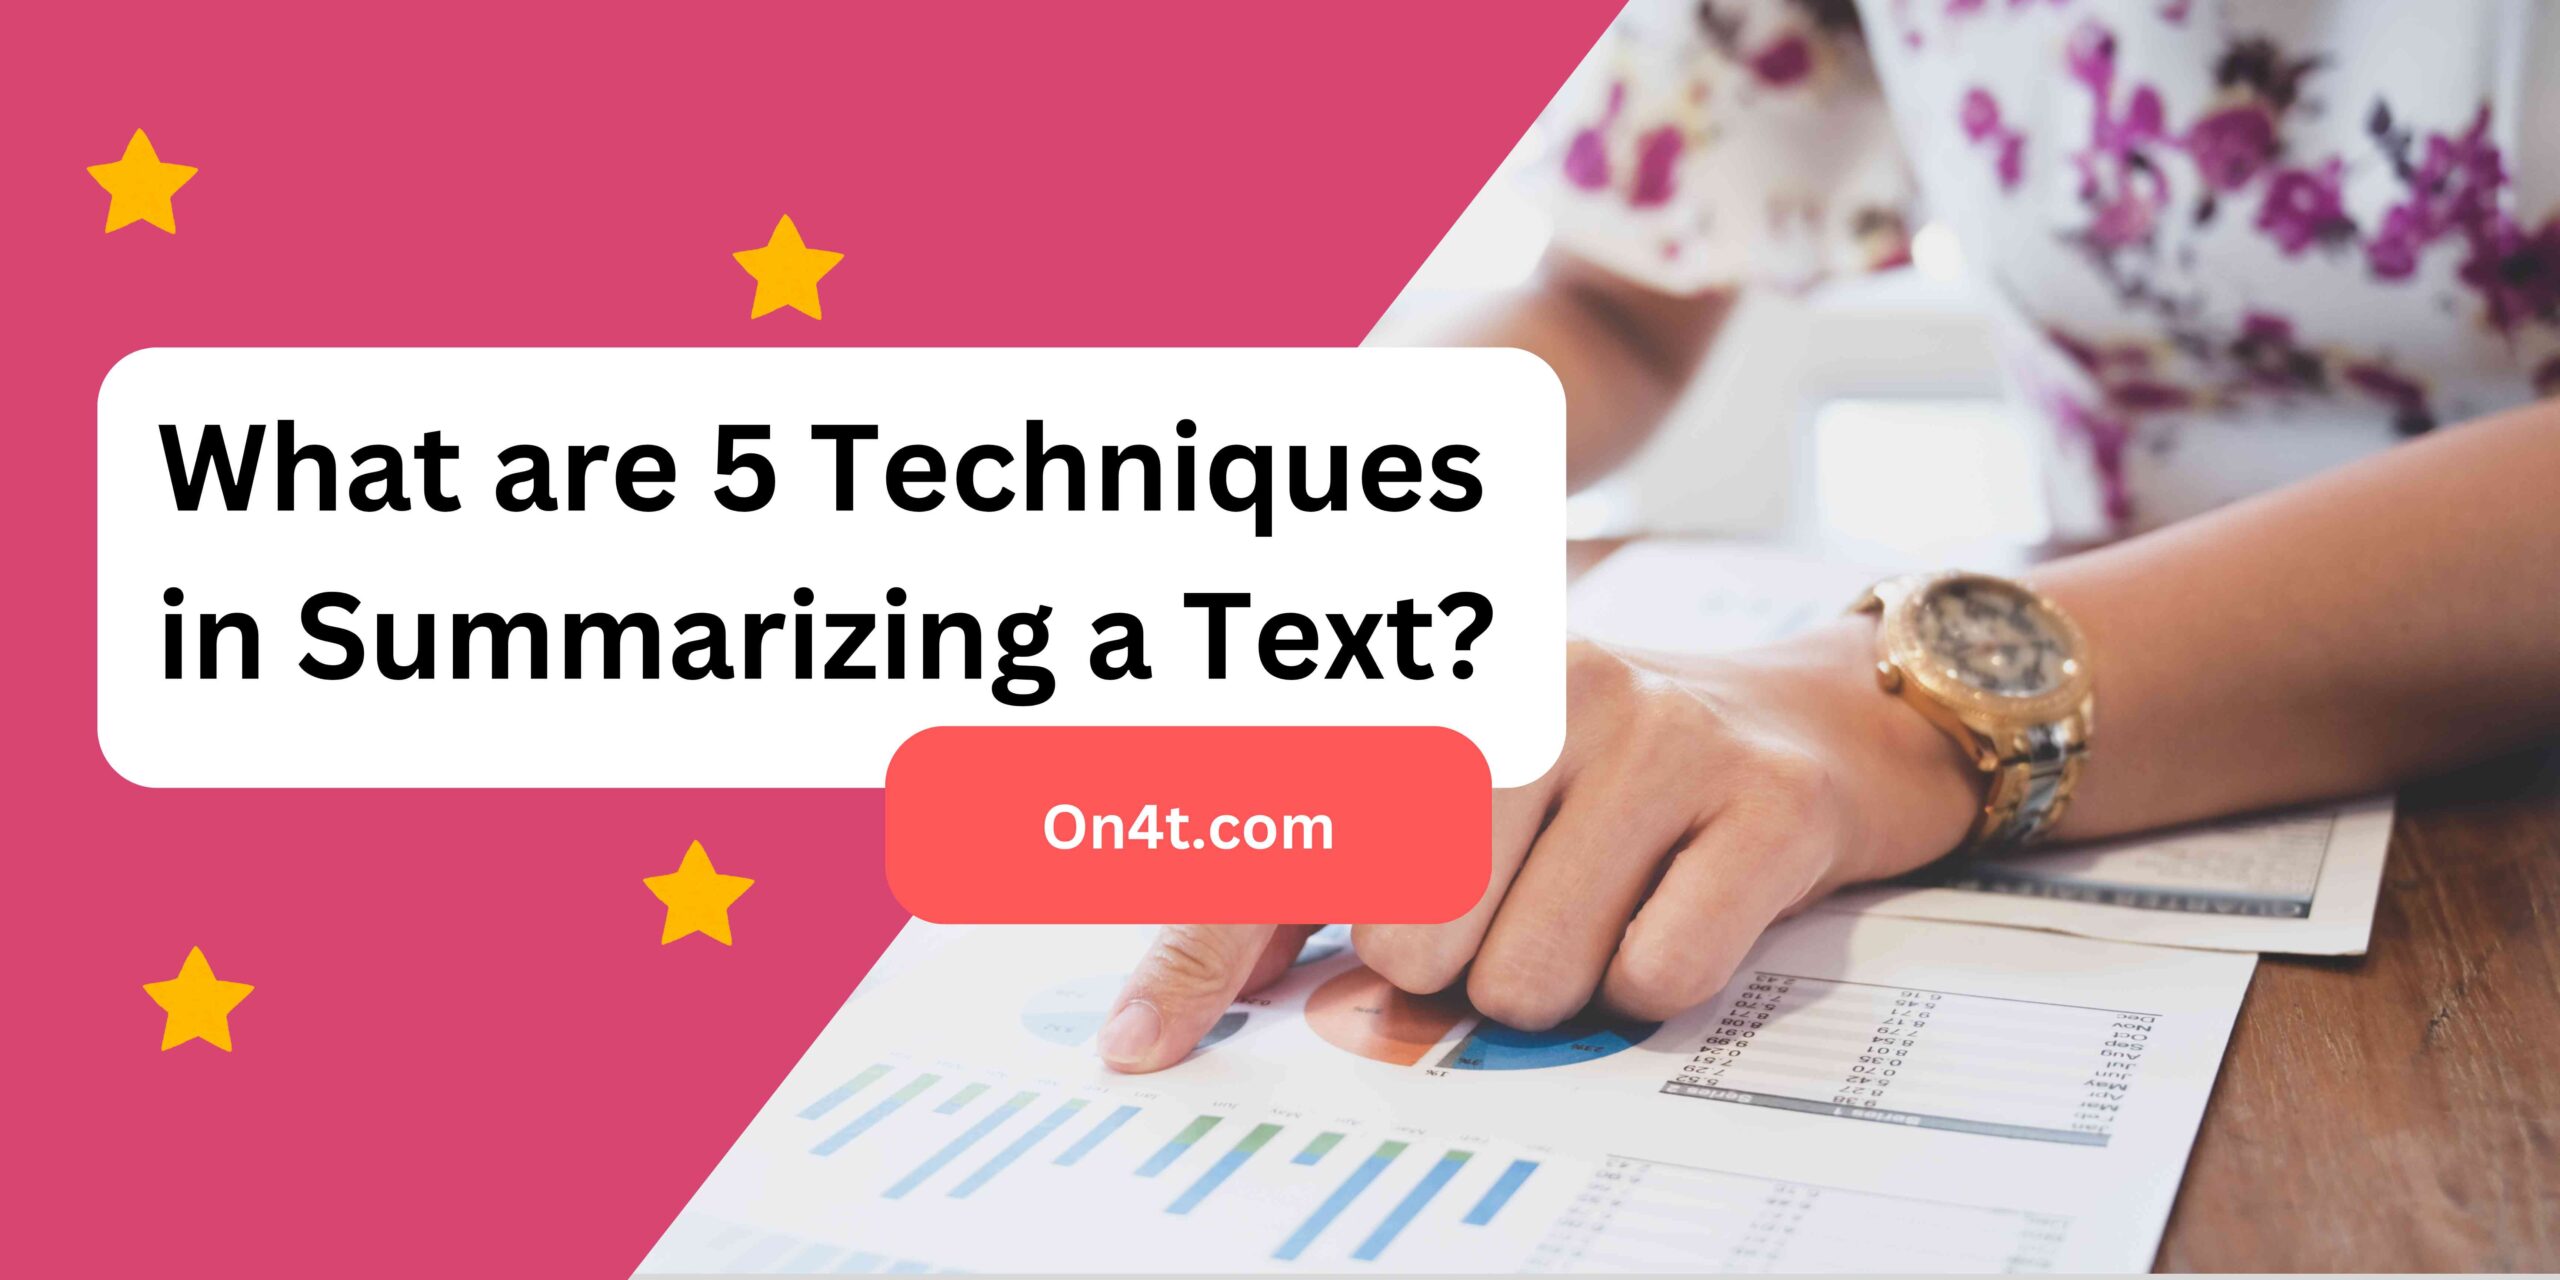 What are 5 Techniques in Summarizing a Text